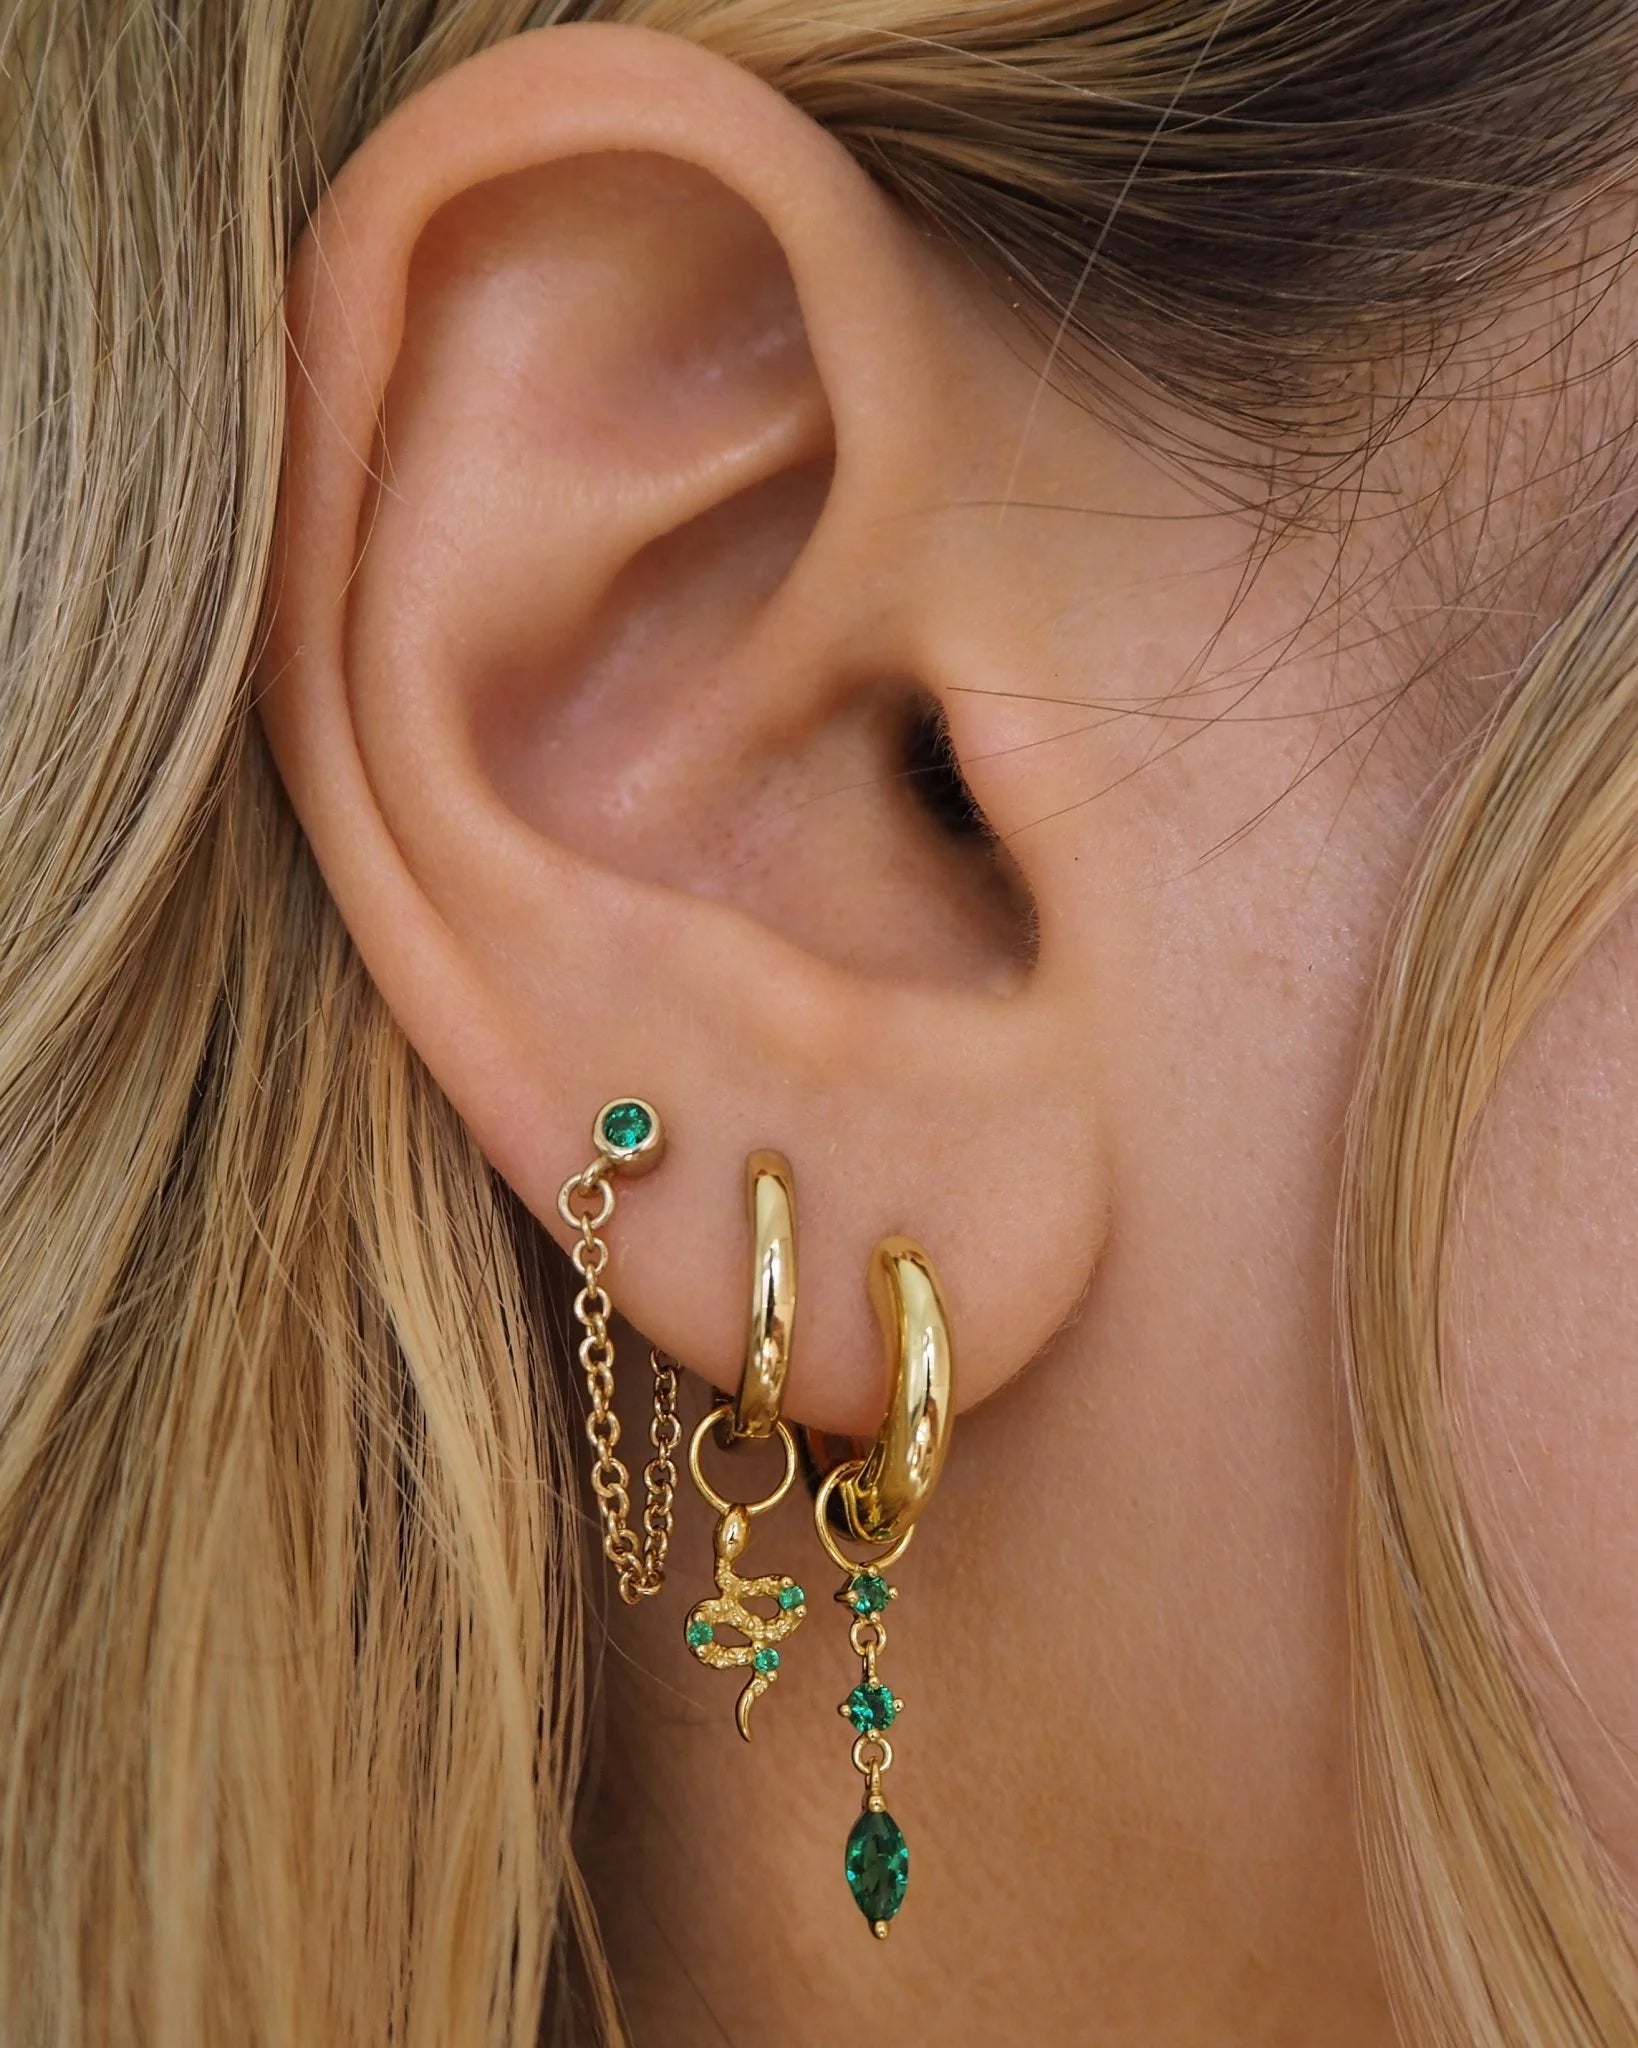 adrienne-earrings-five-and-two-jewelry-studs-889358_2048x2048_be5dd781-e887-4a85-a2a6-907c5a079777.webp